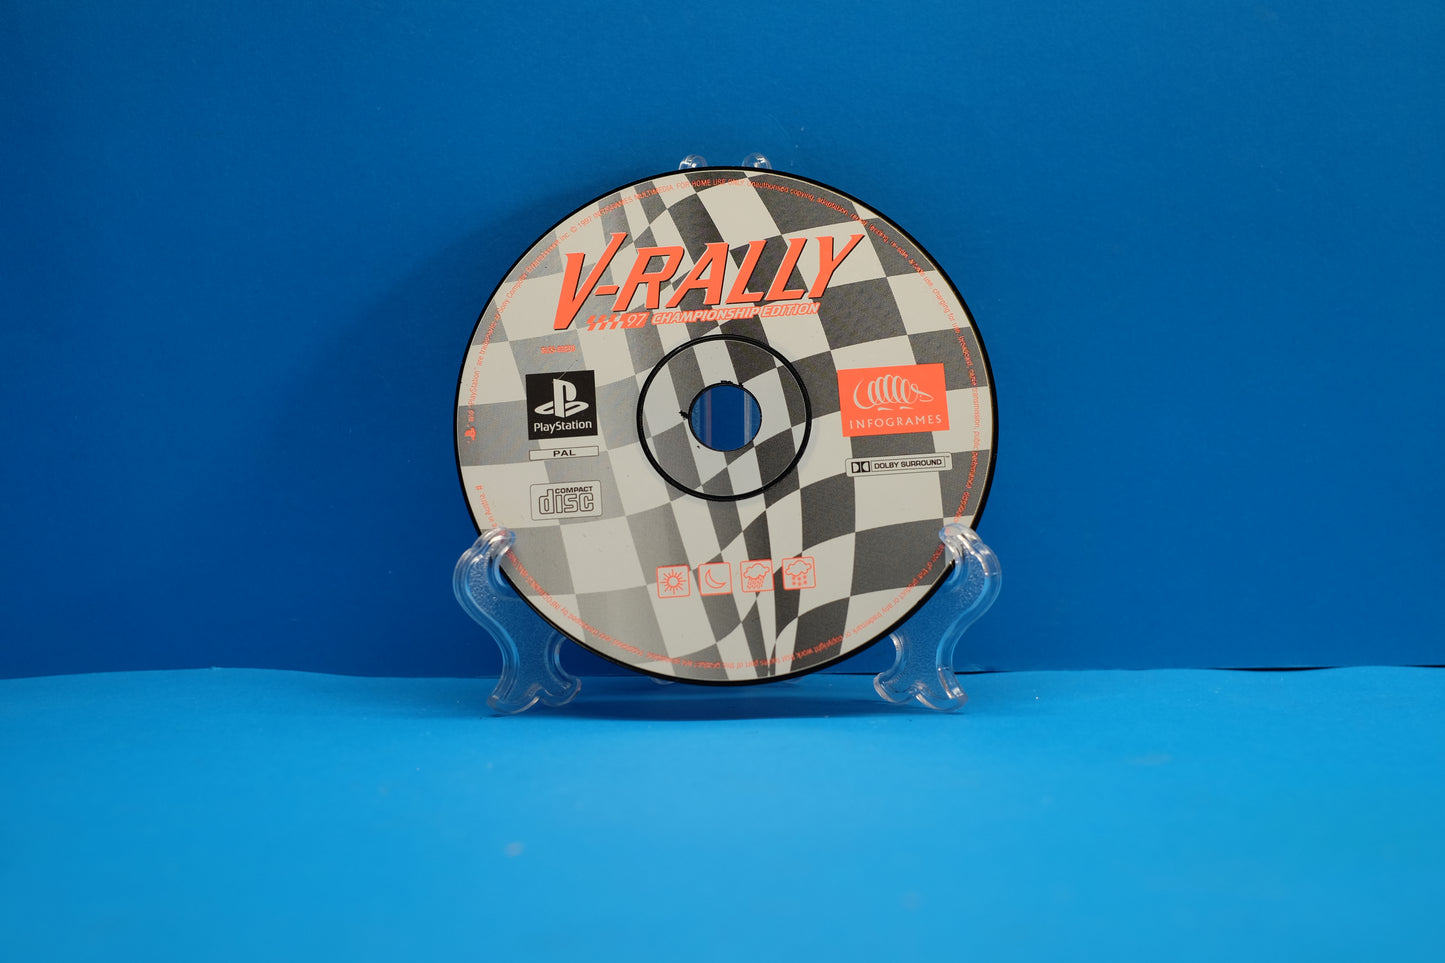 V-Rally 97 Championship Edition *Disc Only* - Playstation 1